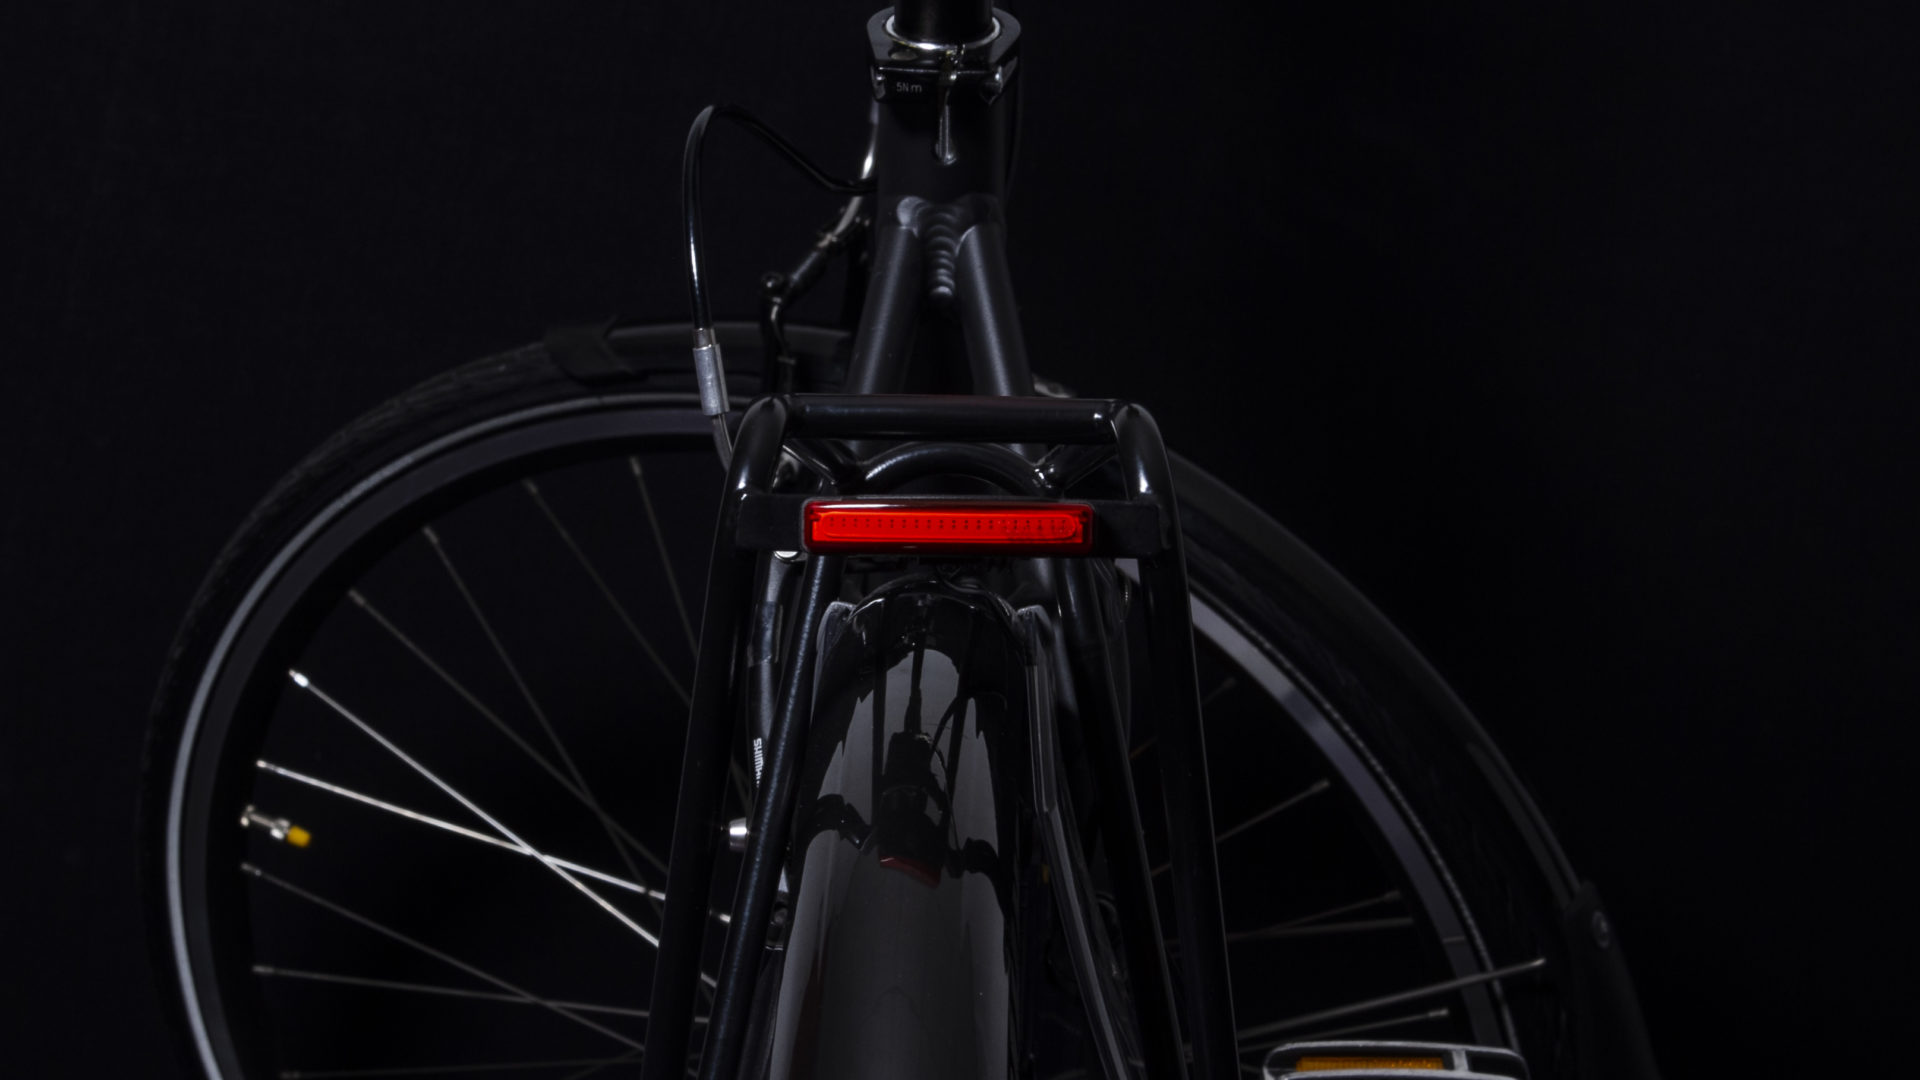 Pimento rearlight for e-bike on carrier with light off